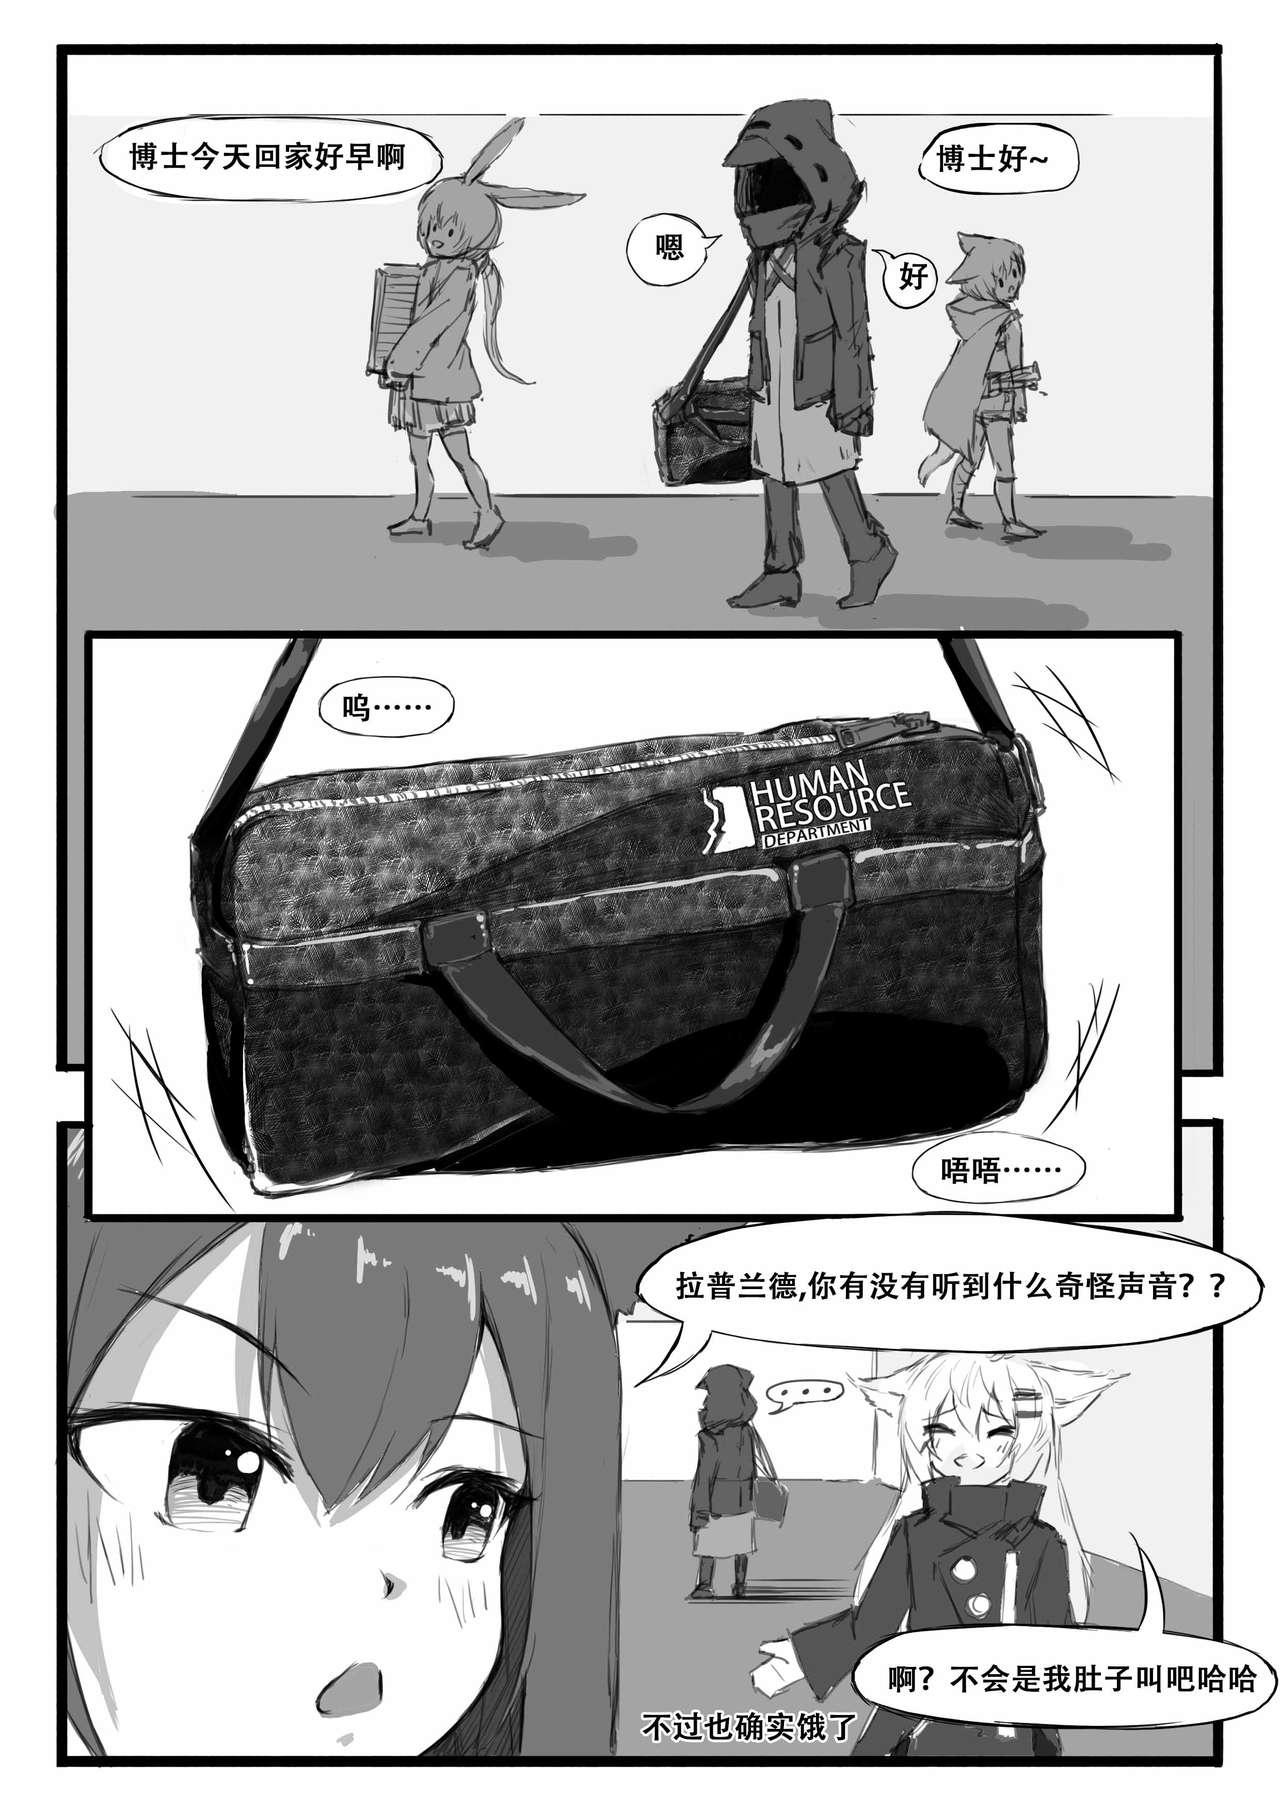 Pool 铃兰的单人任务 - Arknights Bare - Page 10